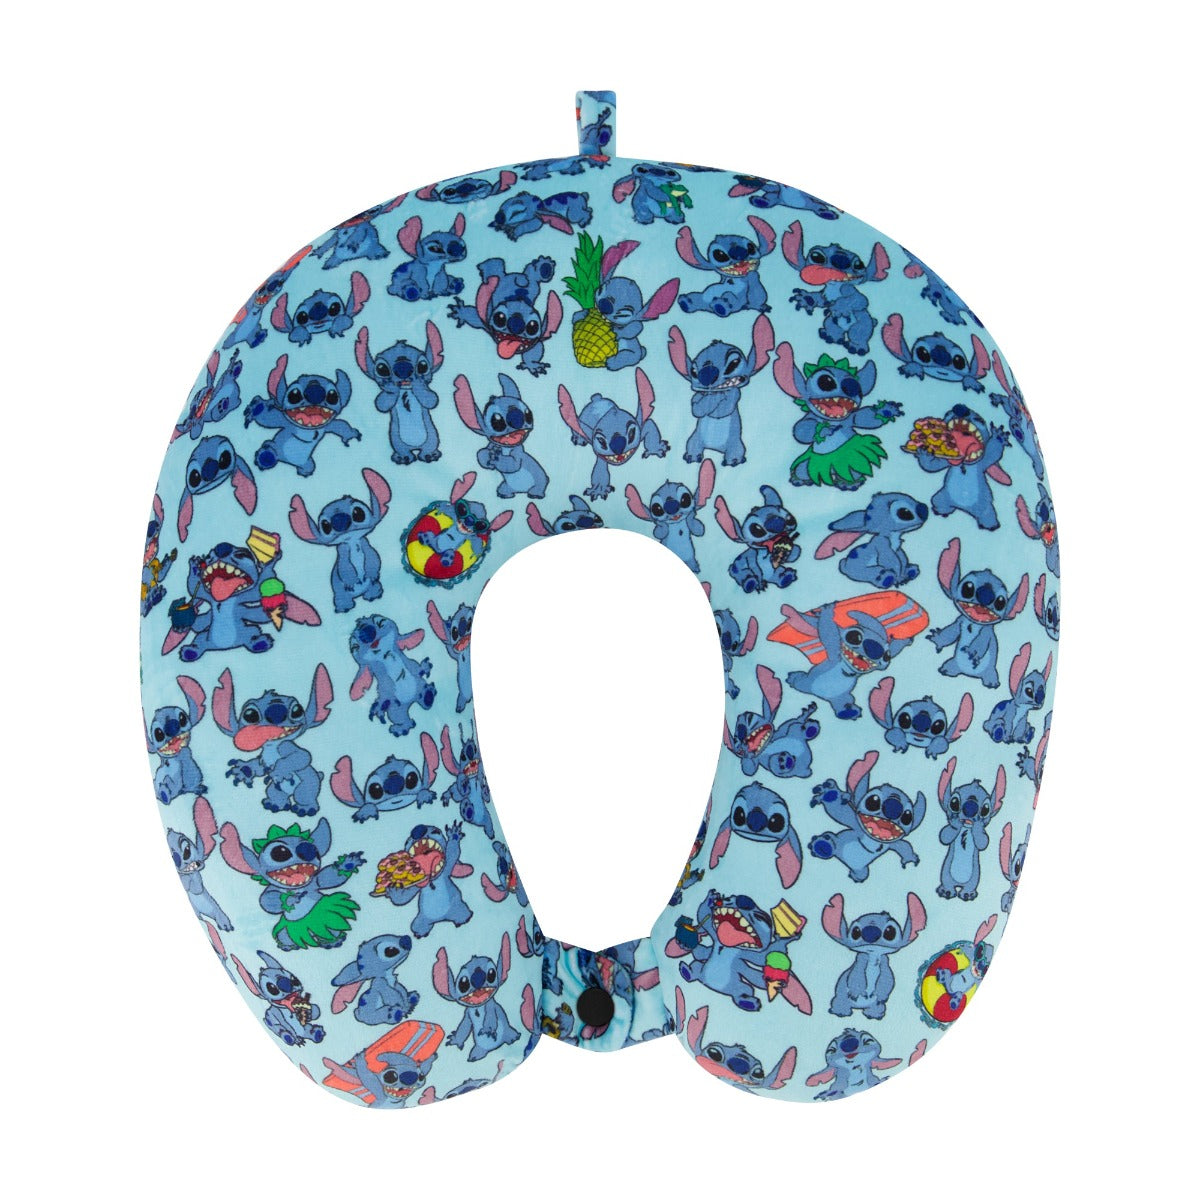 Stitch neck pillow with button closure in light blue - best travelling neck pillows for kids